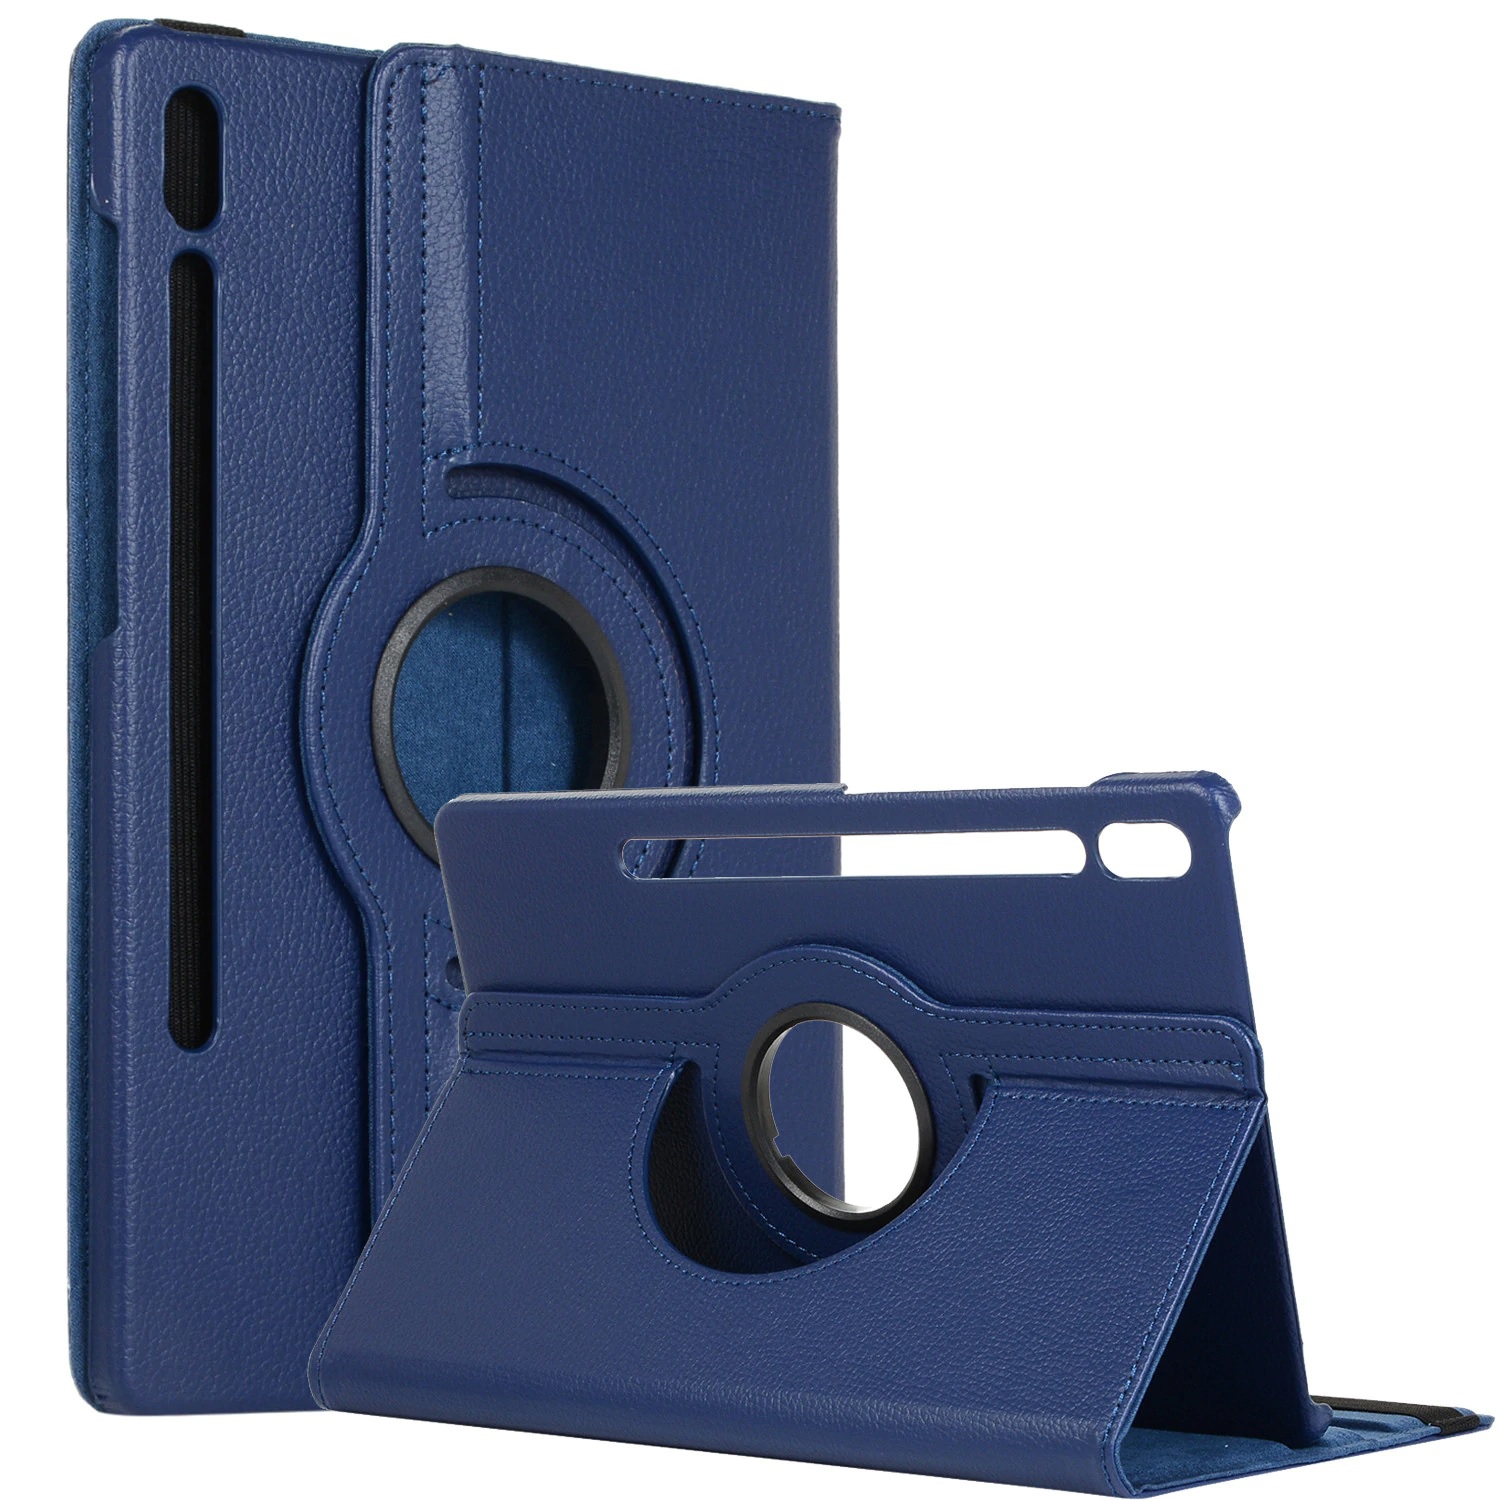 【CSmart】 Rotating PU Leather Stand Case Smart Cover for Samsung Galaxy Tab S7 Plus / S8 Plus 2022 12.4", T970 / X800, Navy